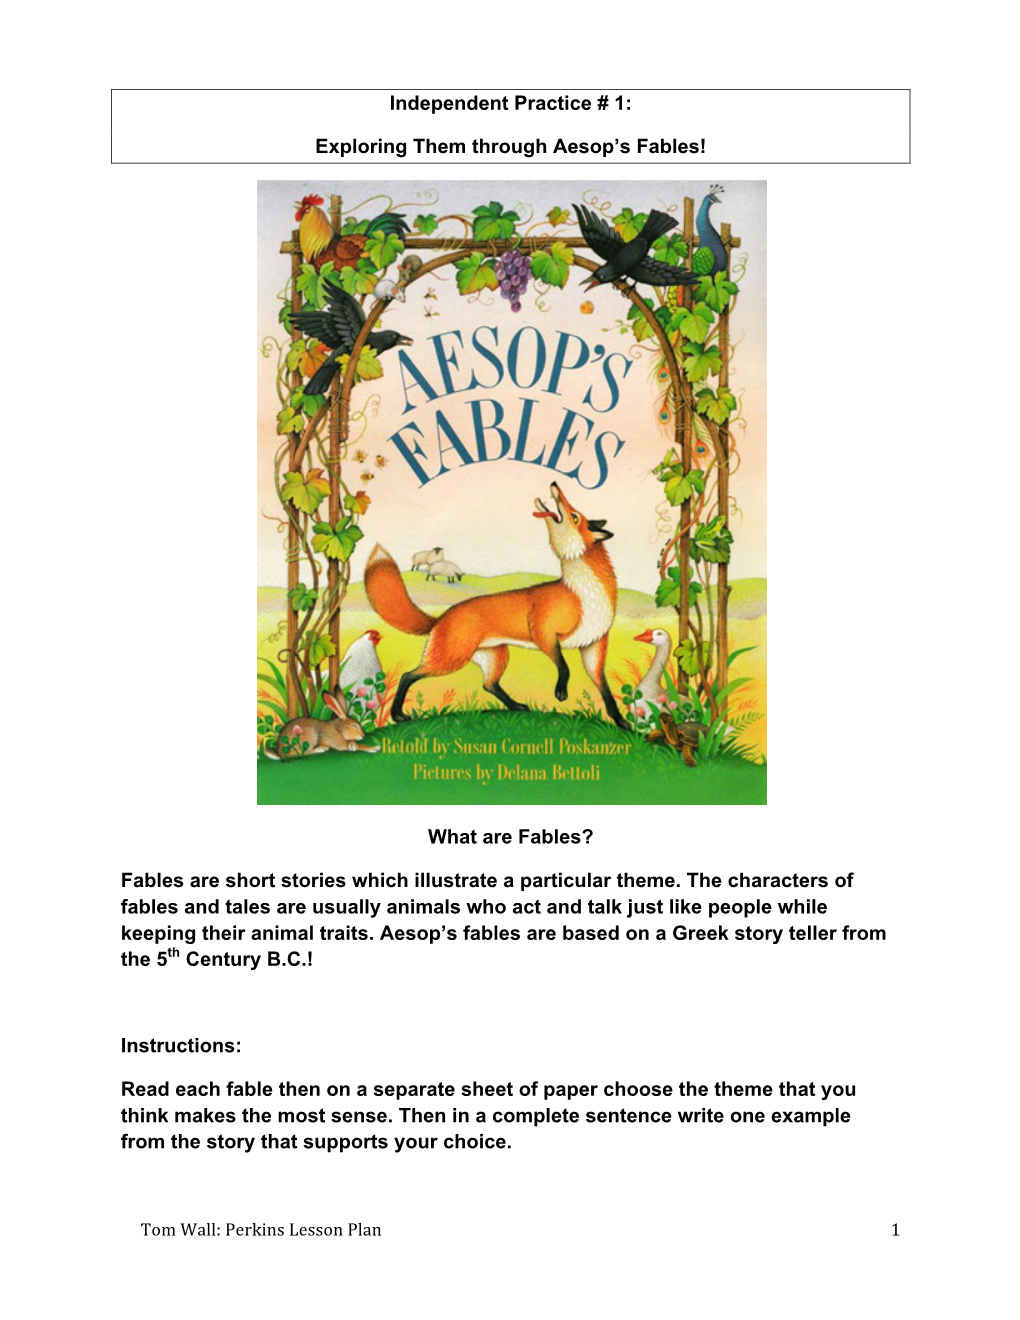 Independent Practice # 1: Exploring Them Through Aesop's Fables!